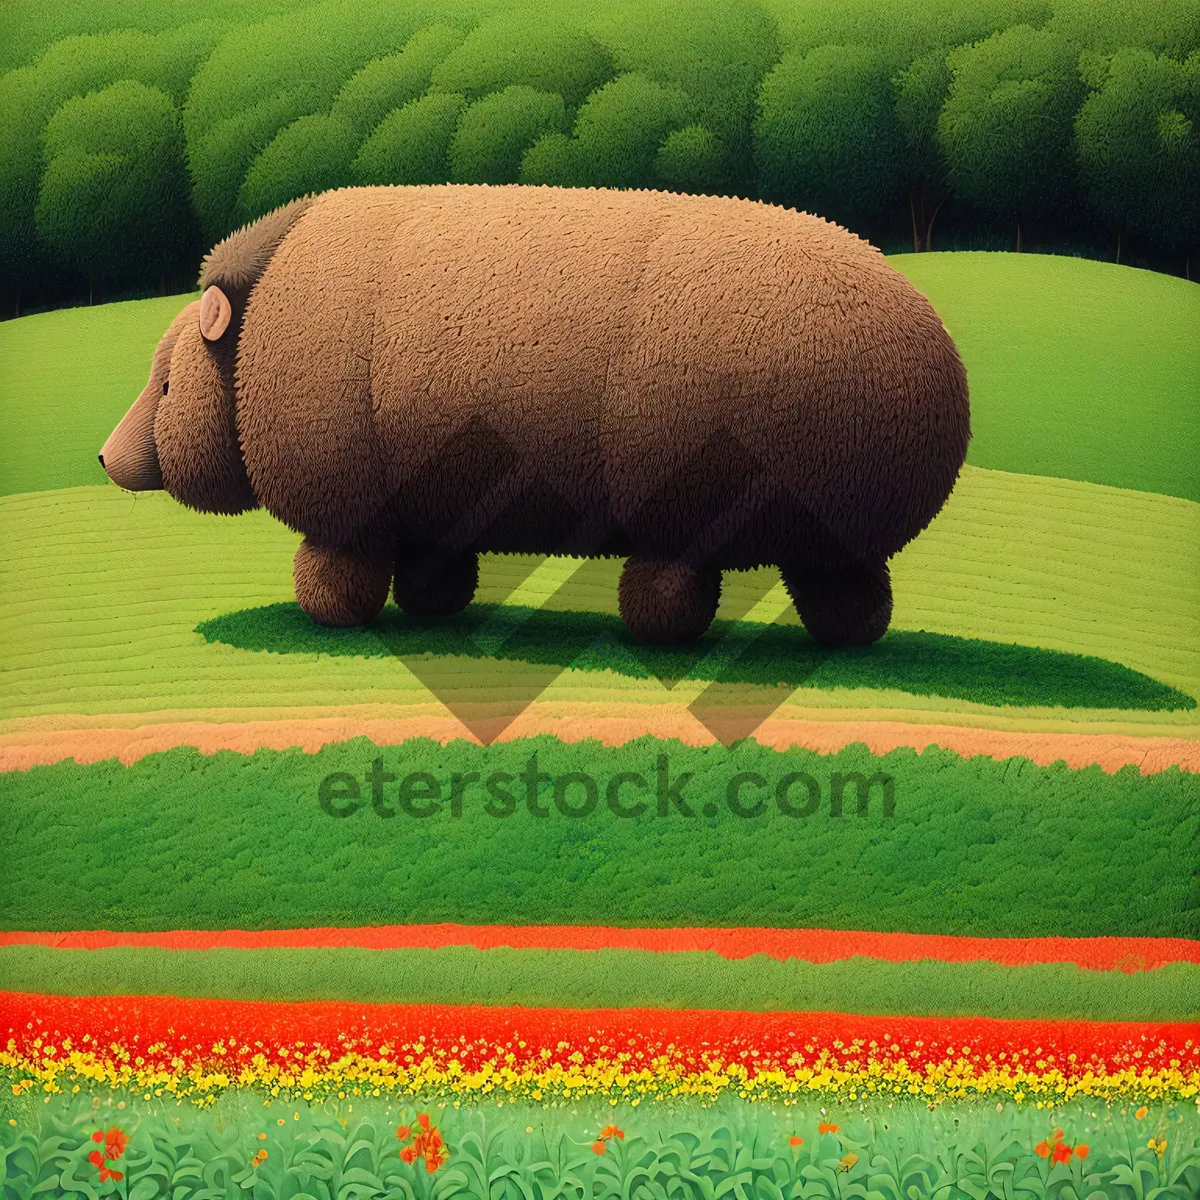 Picture of Jigsaw Puzzle Game with Hippopotamus in Grass Field